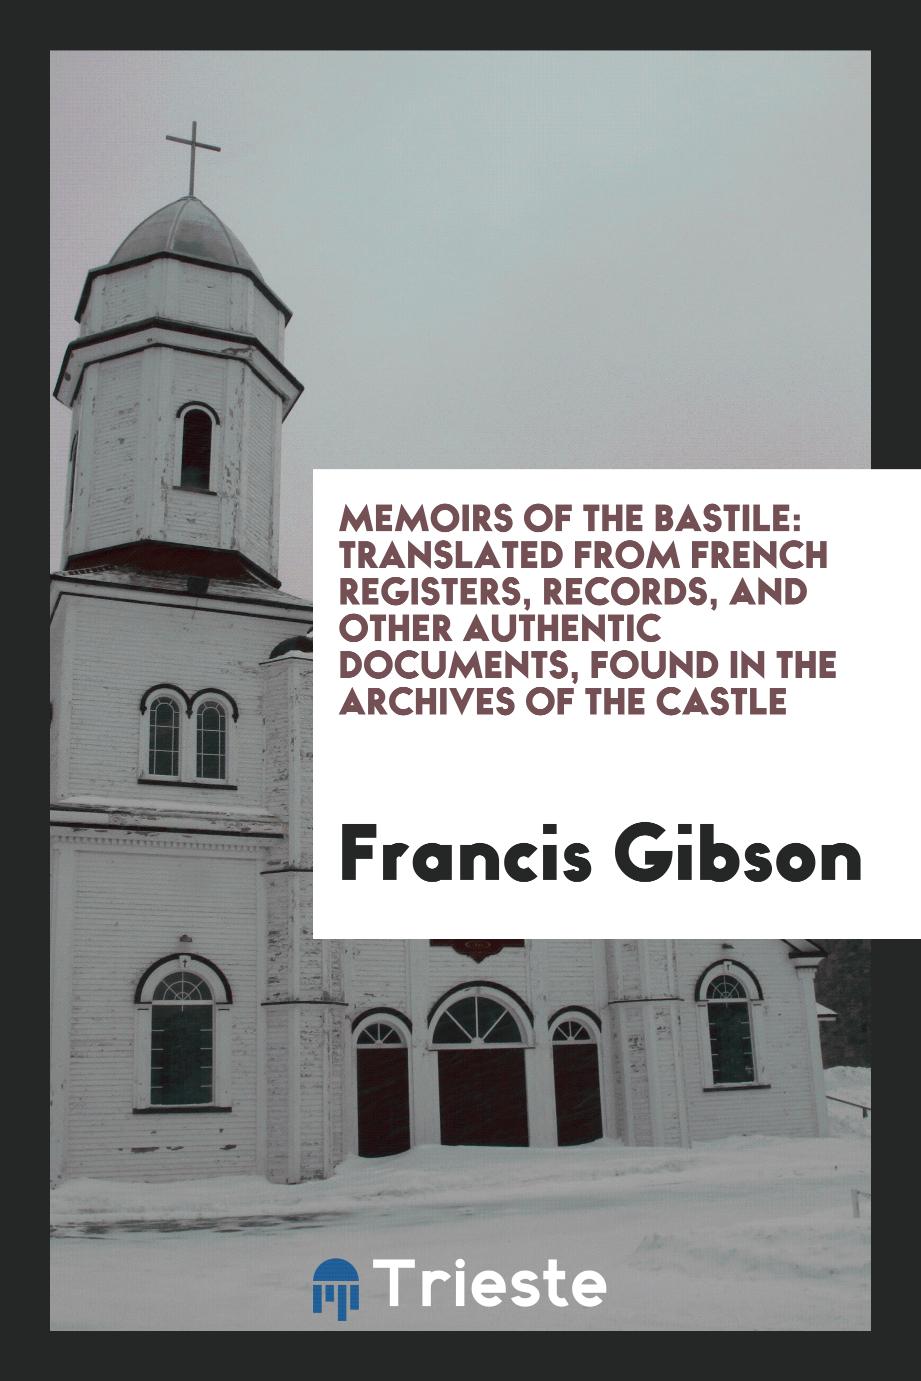 Memoirs of the Bastile: Translated from French Registers, Records, and Other Authentic Documents, Found in the Archives of the Castle